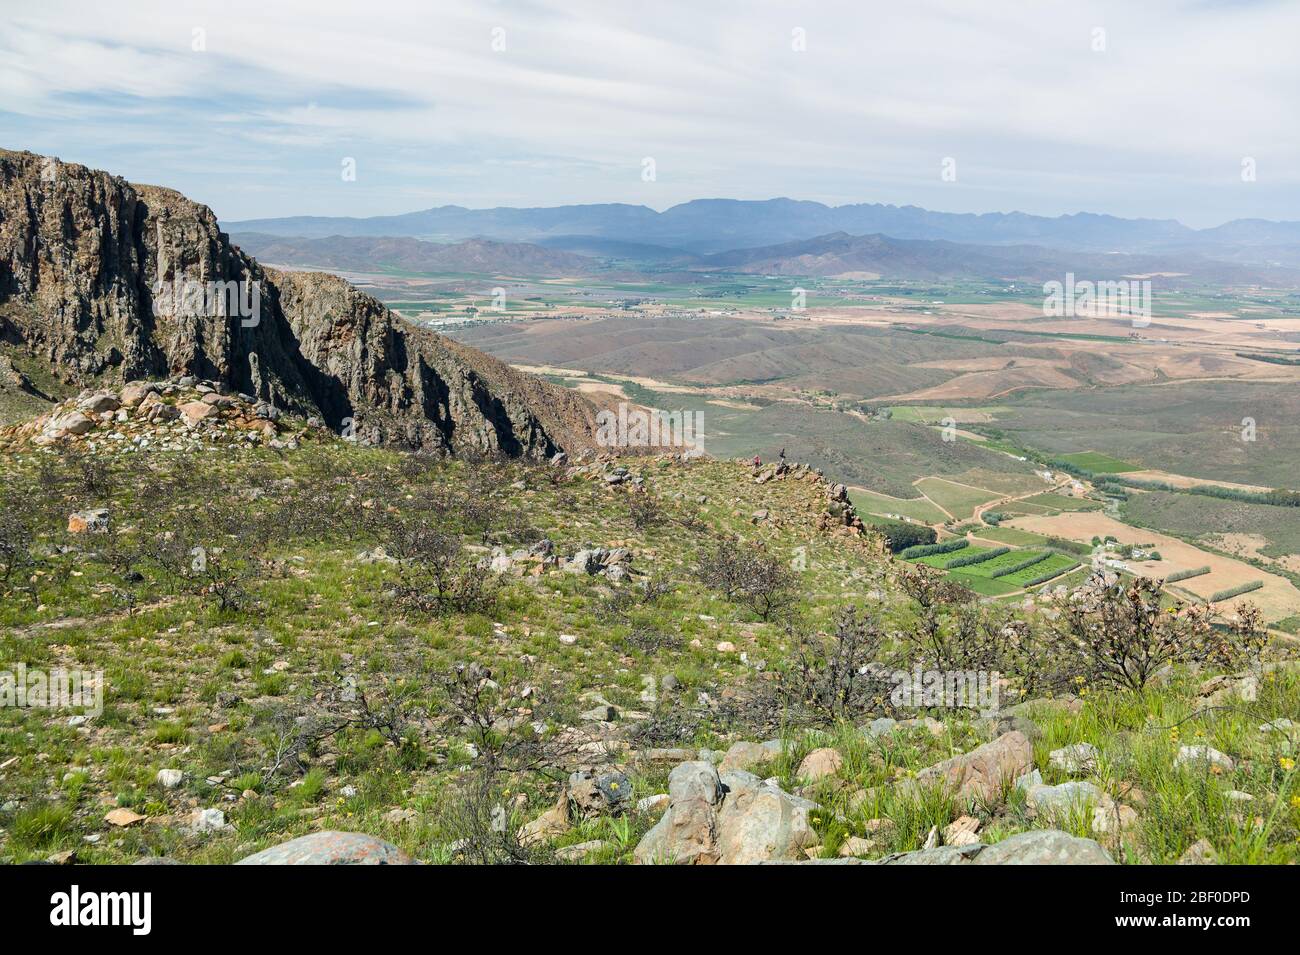 Bloupunt hiking trail stretches nearly sixteen kilometers in the mountains of Montagu, Western Cape, South Africa with panoramic views, ravines, mount Stock Photo